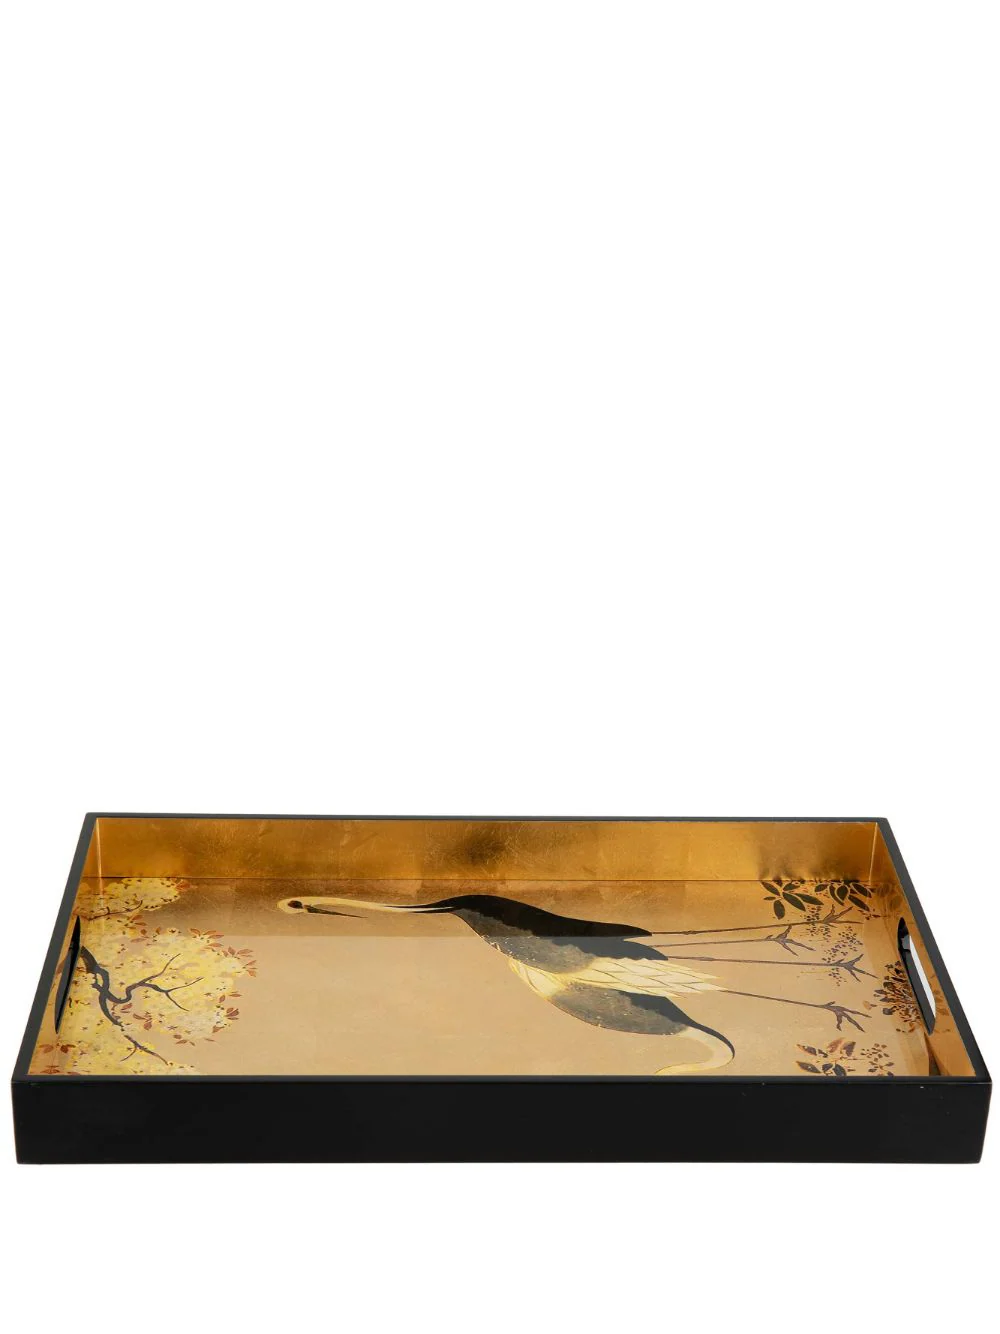 Decorative Lacquered Wood Trays, Bird